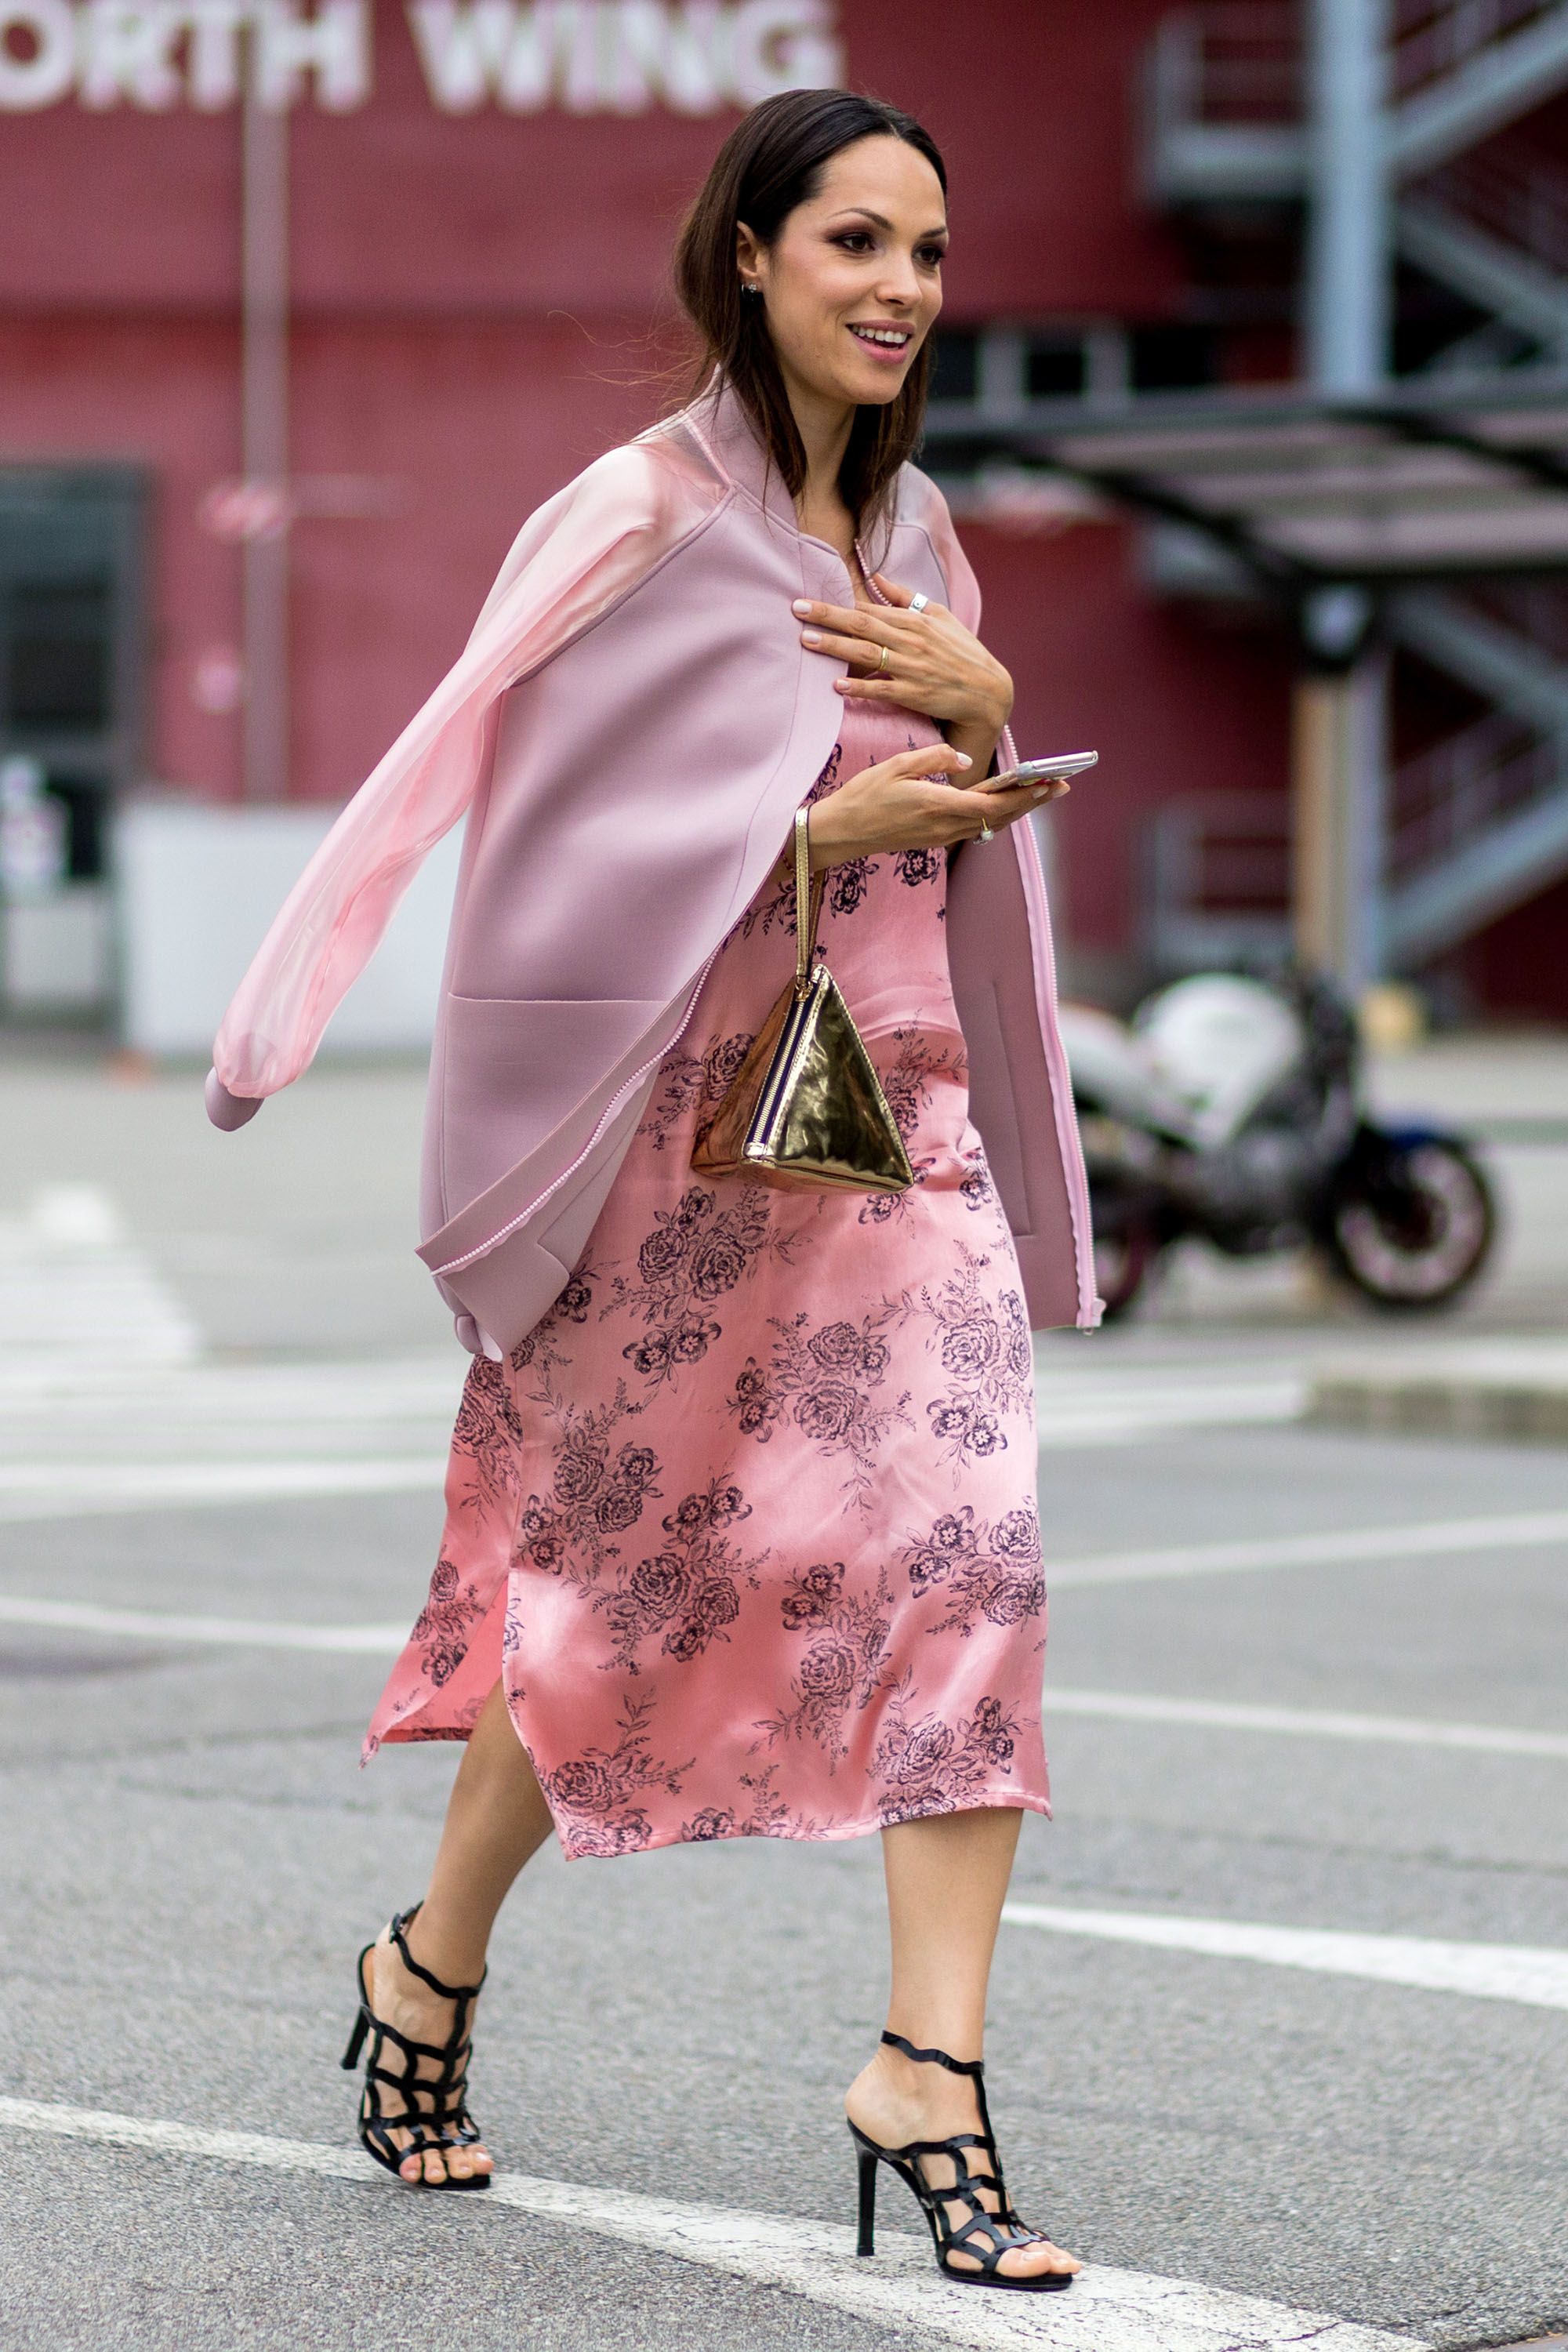 Pink Street Style - National Pink Day Fashion